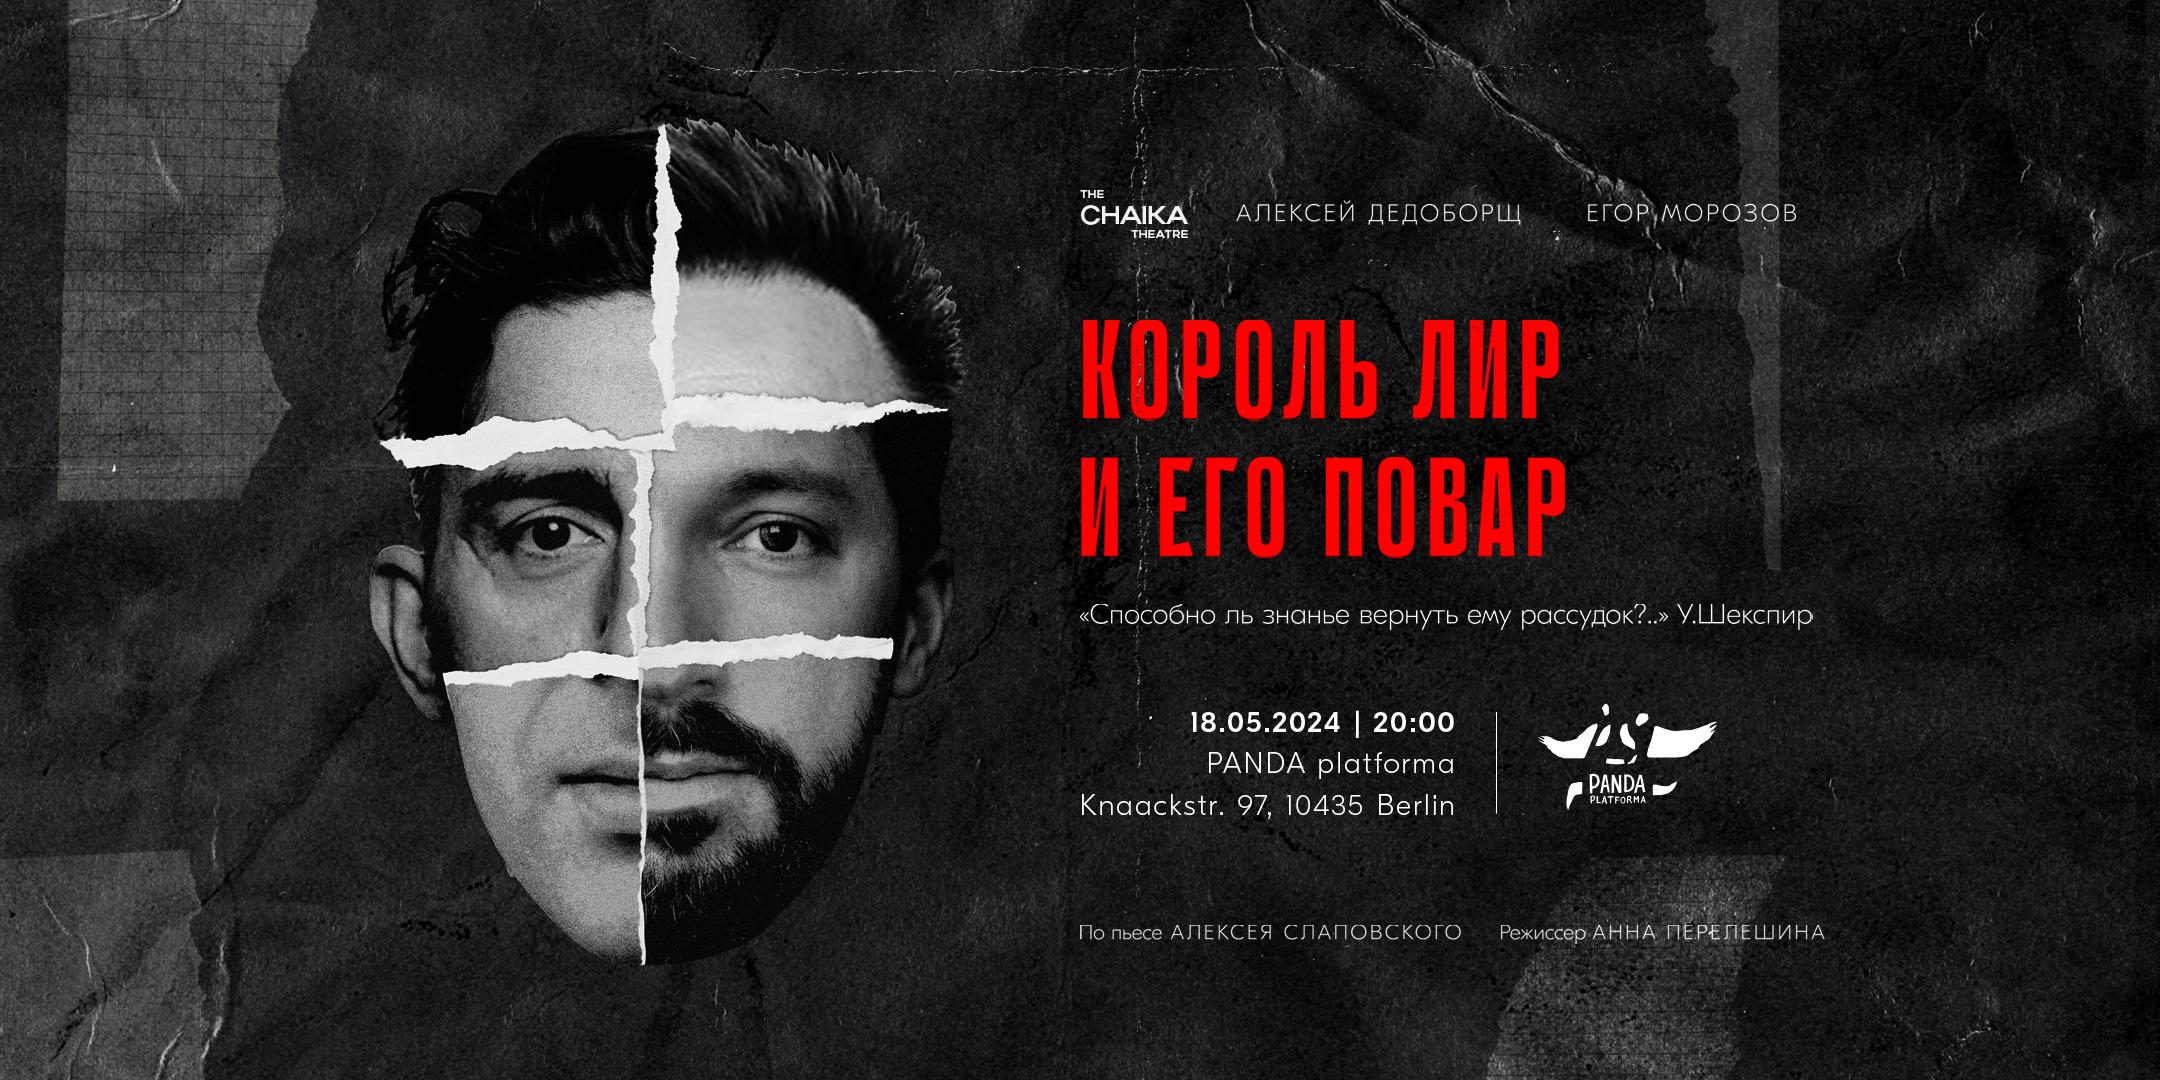 King Lear and his Chef / Play by the Chaika Theatre - 
		18/05, 20:00